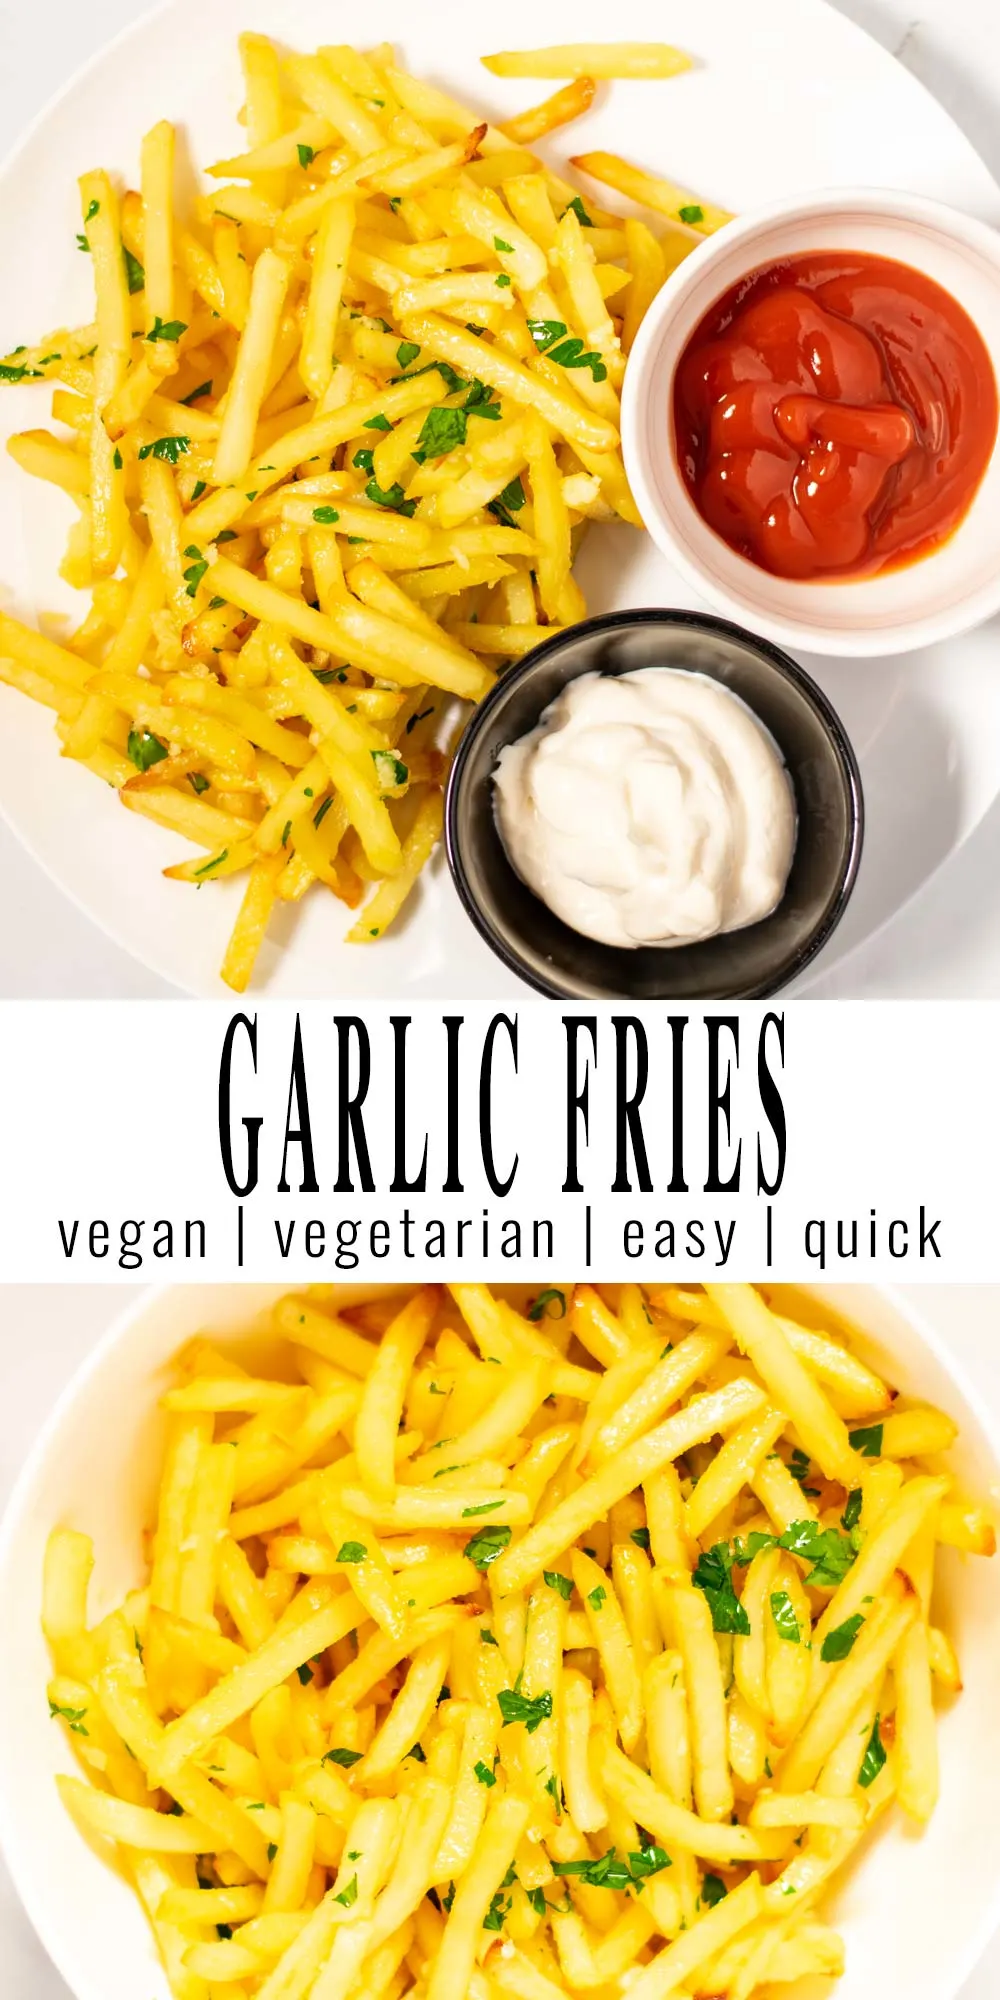 Collage of two photos of Garlic Fries with recipe title text.